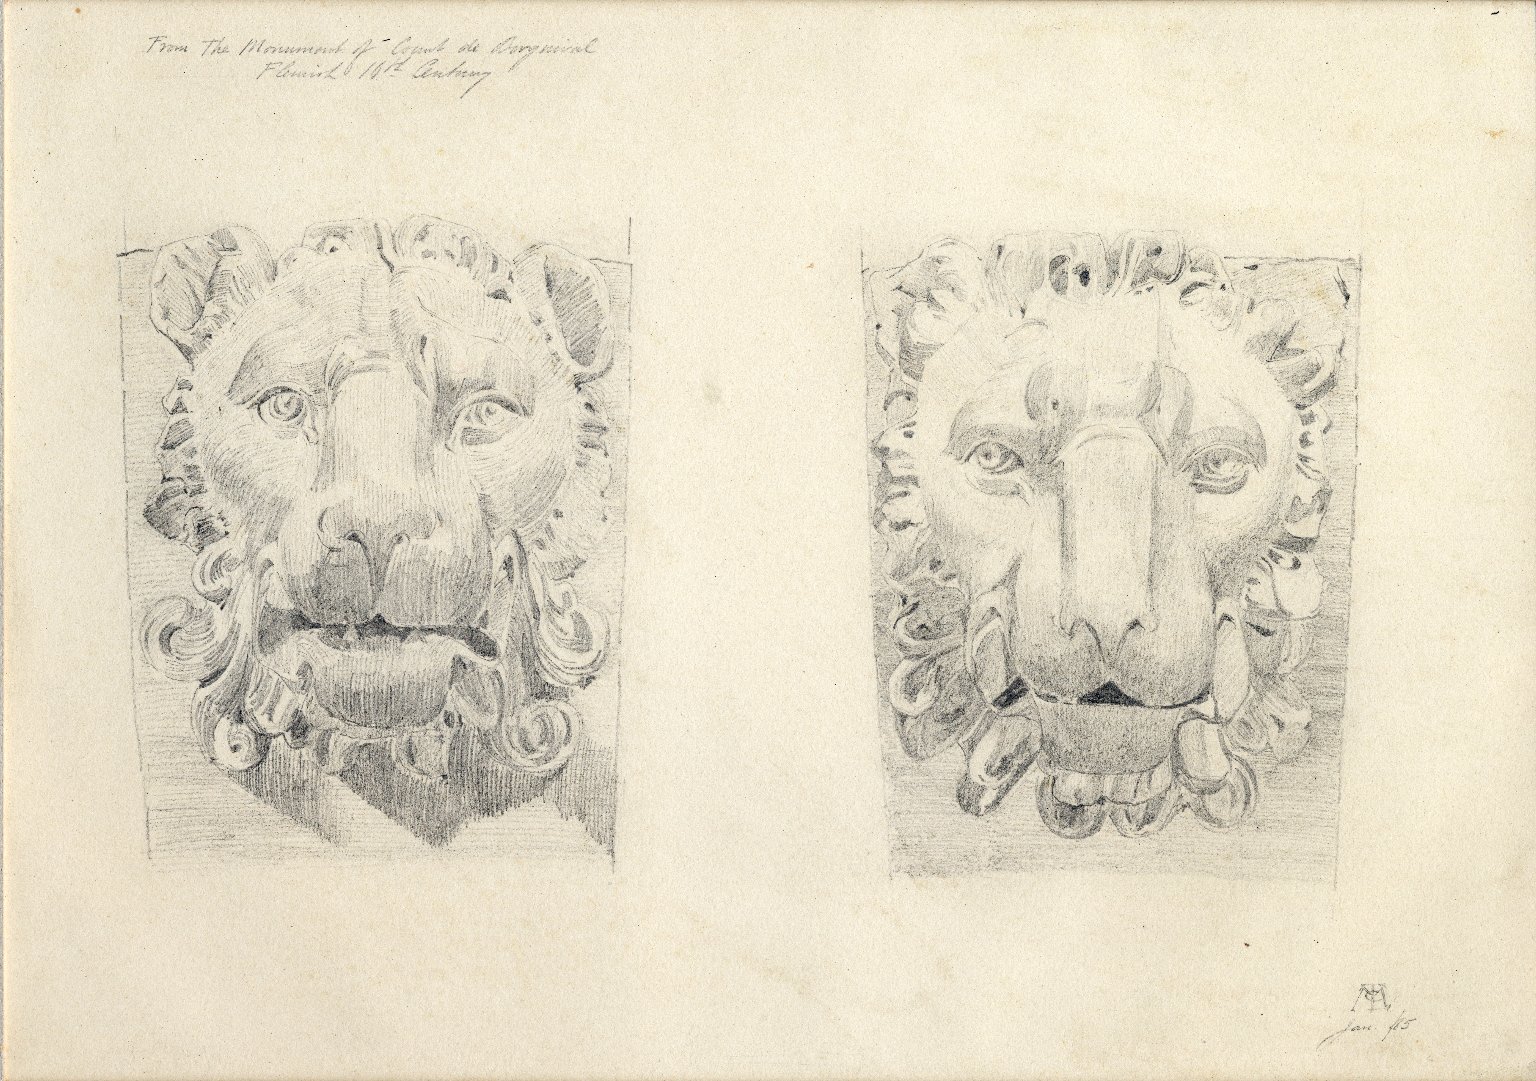 Lionhead designs from Monument of the Count de Borgnival